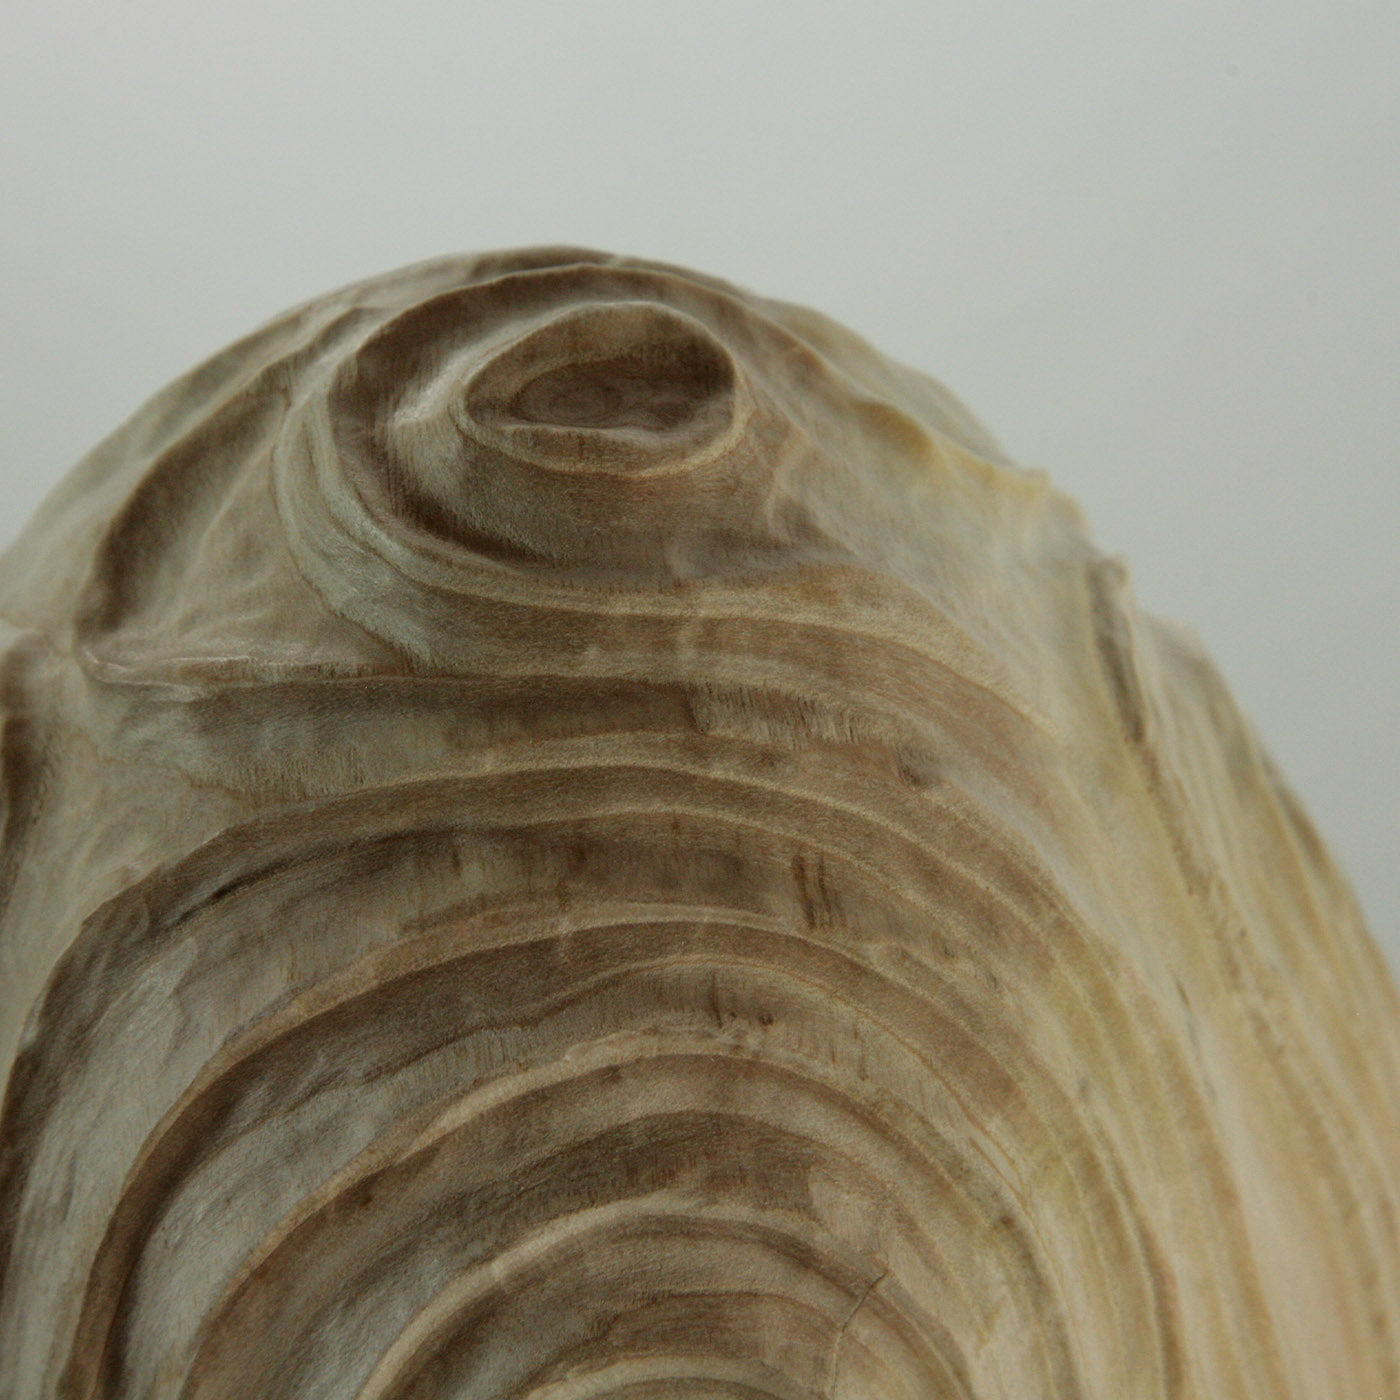 The Impossiballs Hollow Form Grooved Vase - Alternative view 2